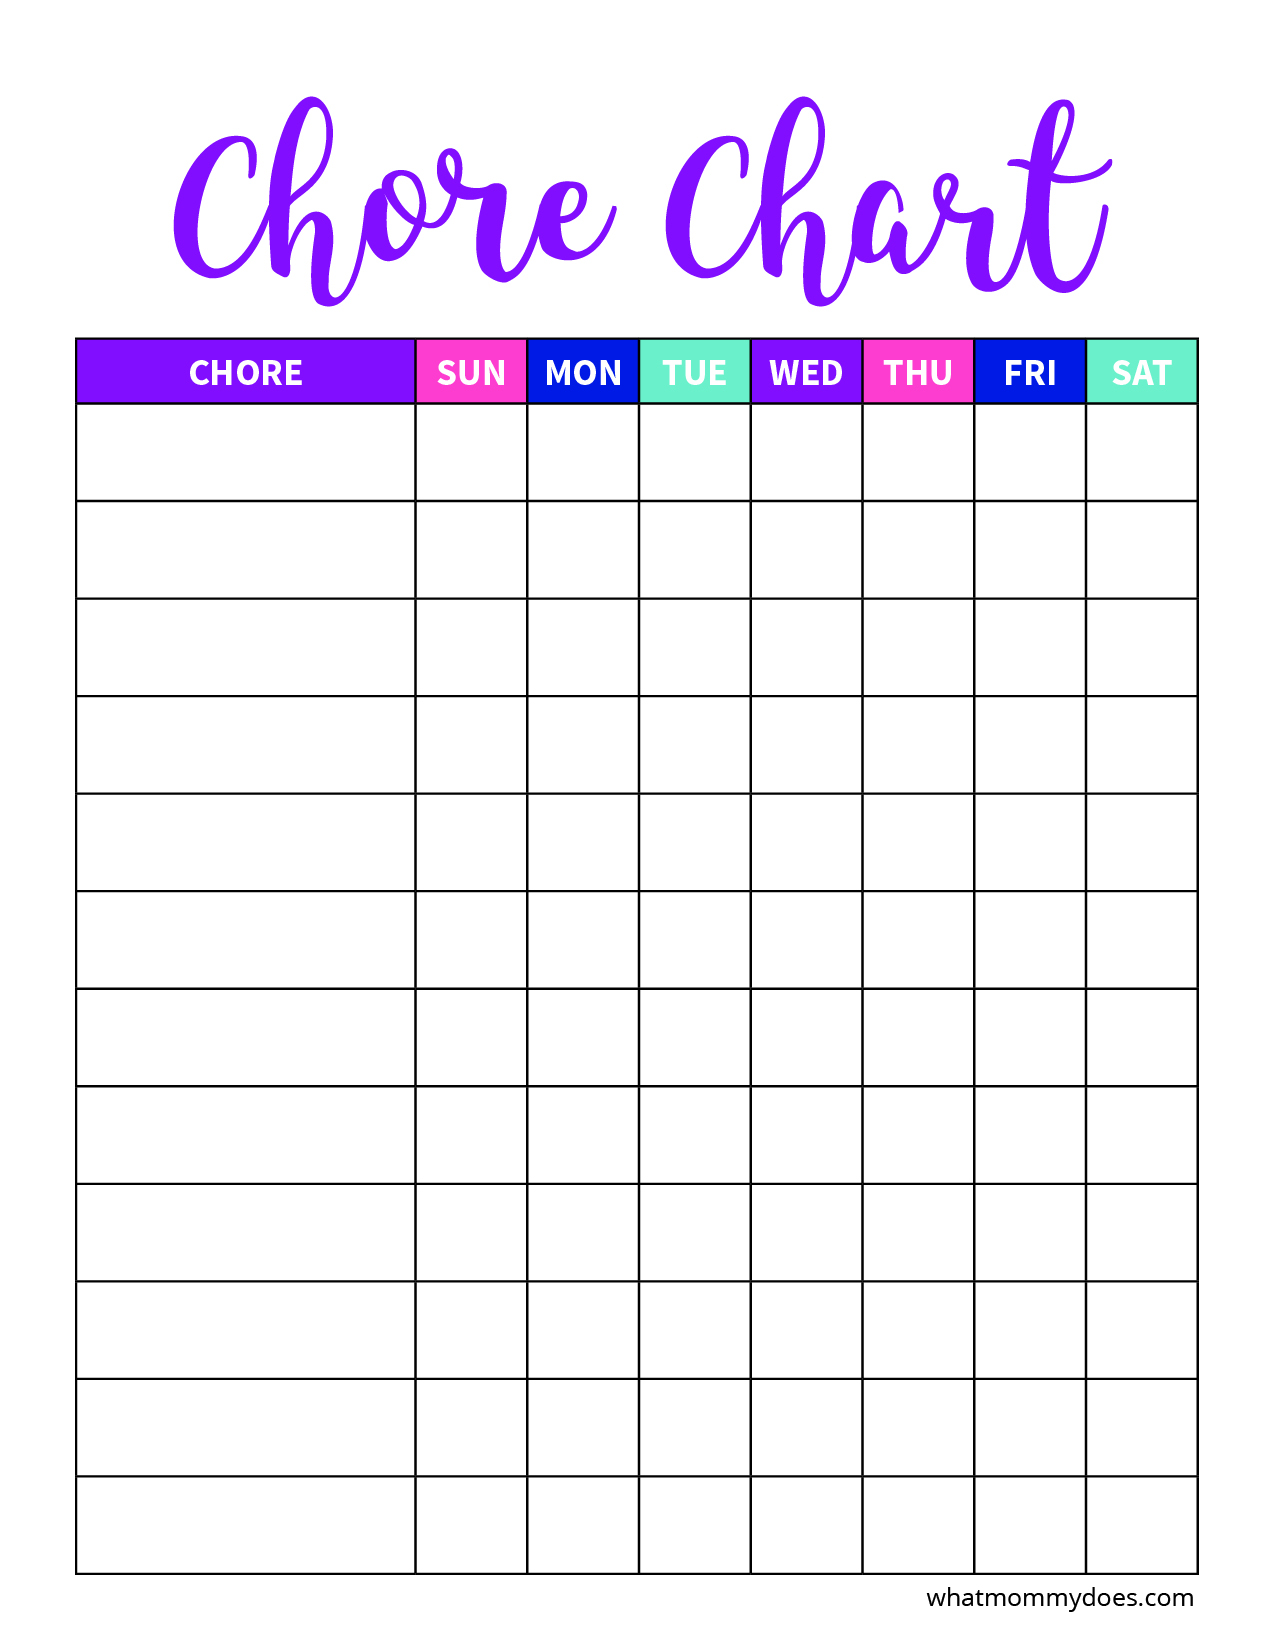 Chore Template Free from www.whatmommydoes.com